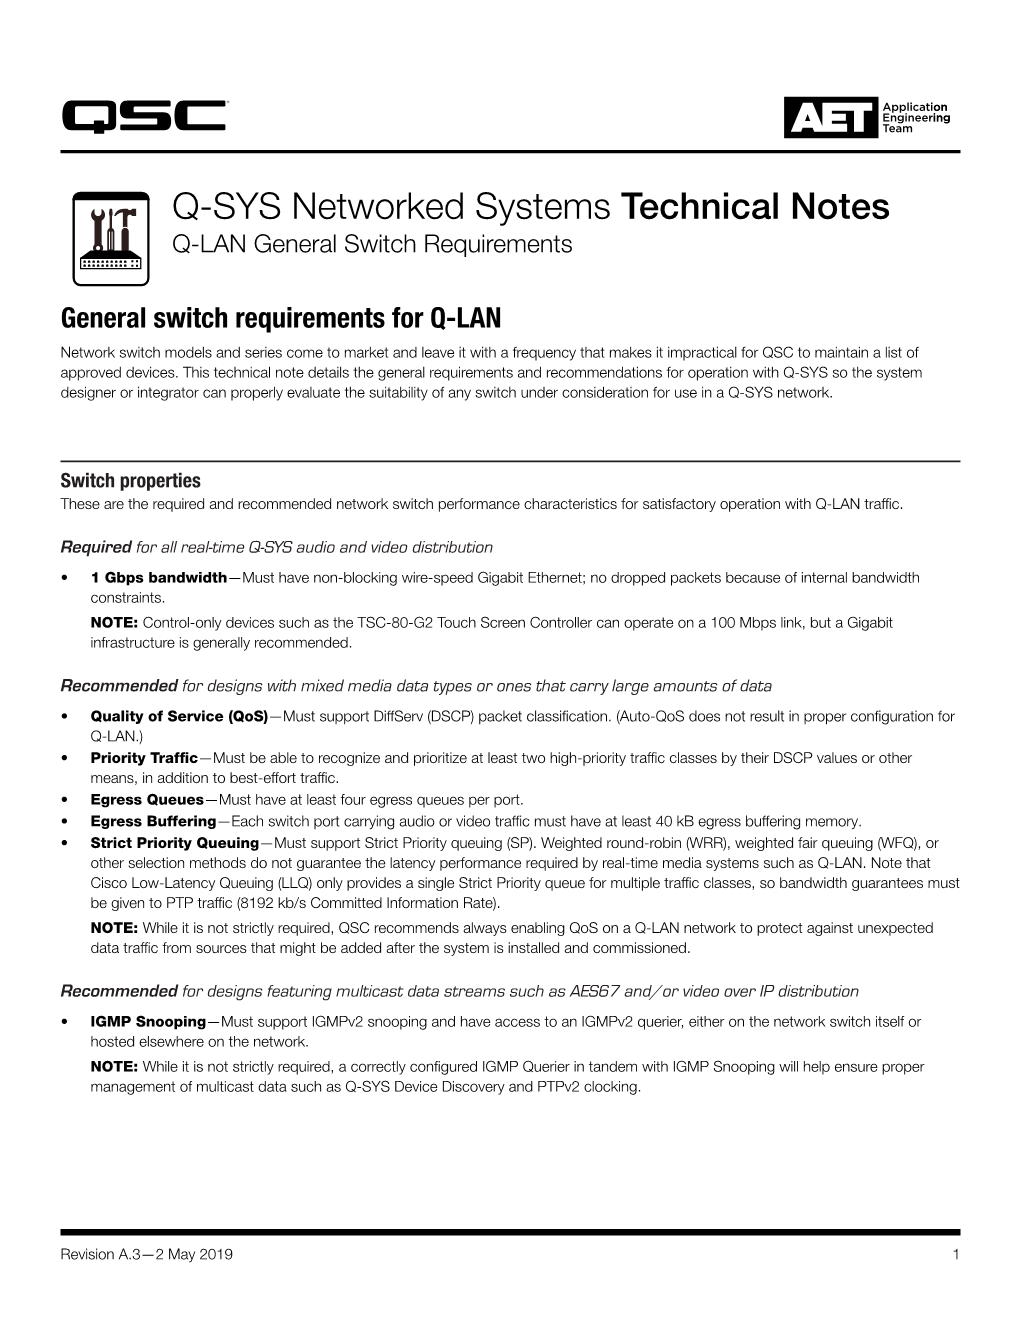 Q-SYS™ Technical Note